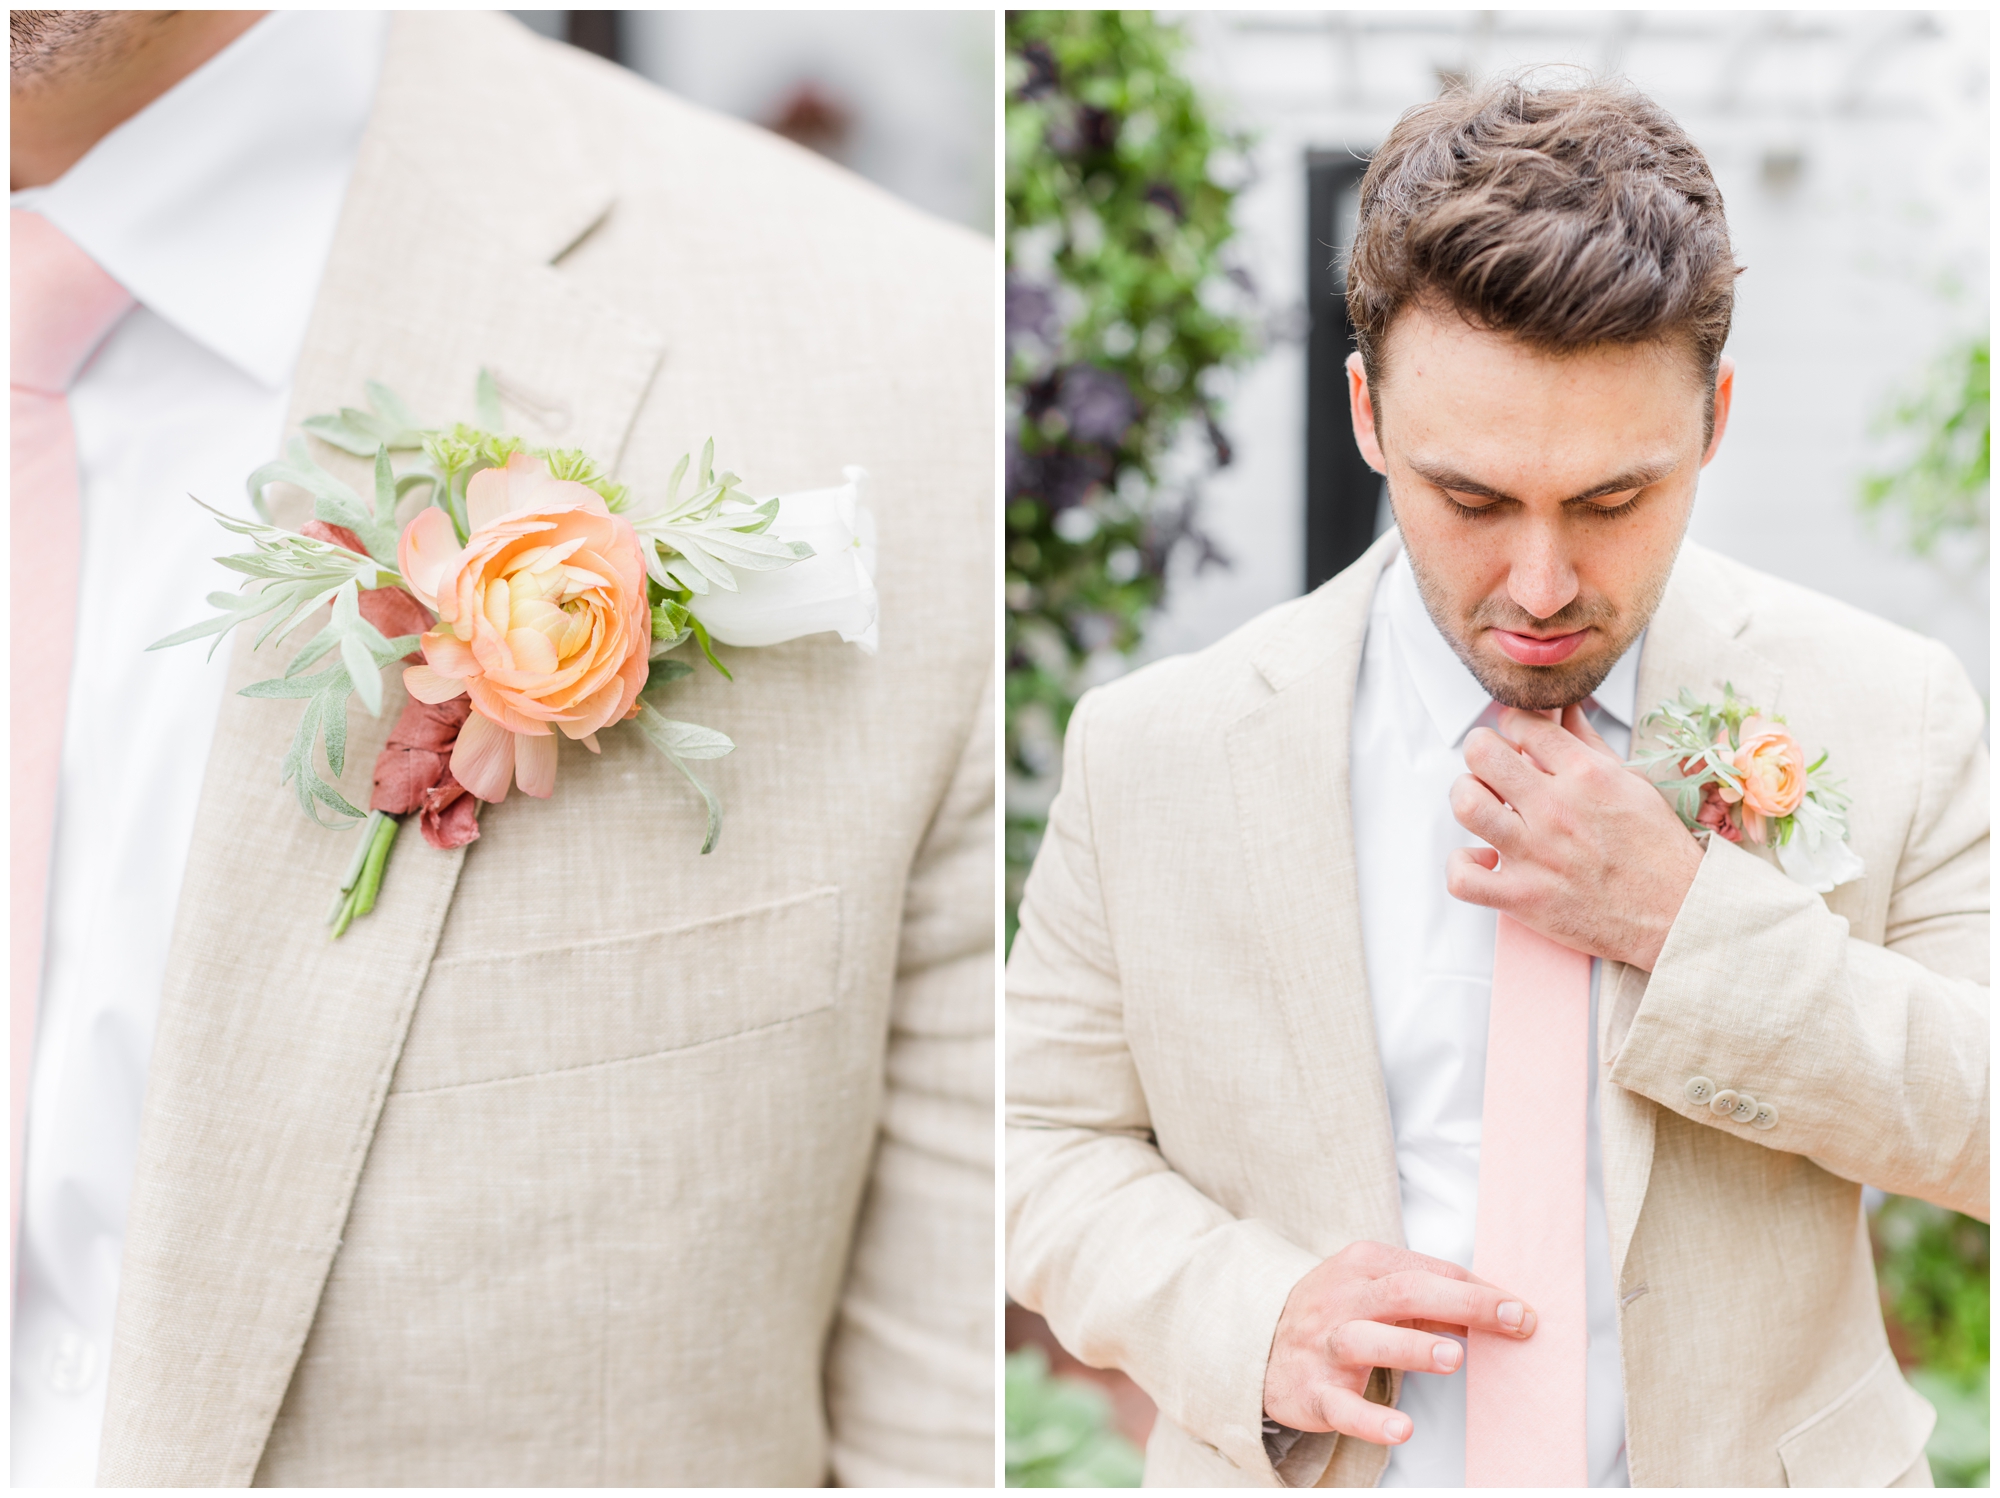 The groom poses in his tan linen suit. He is wearing a pale pink tie with a boutonniere (orange and white flowers plus greenery) tied with a pink ribbon.  